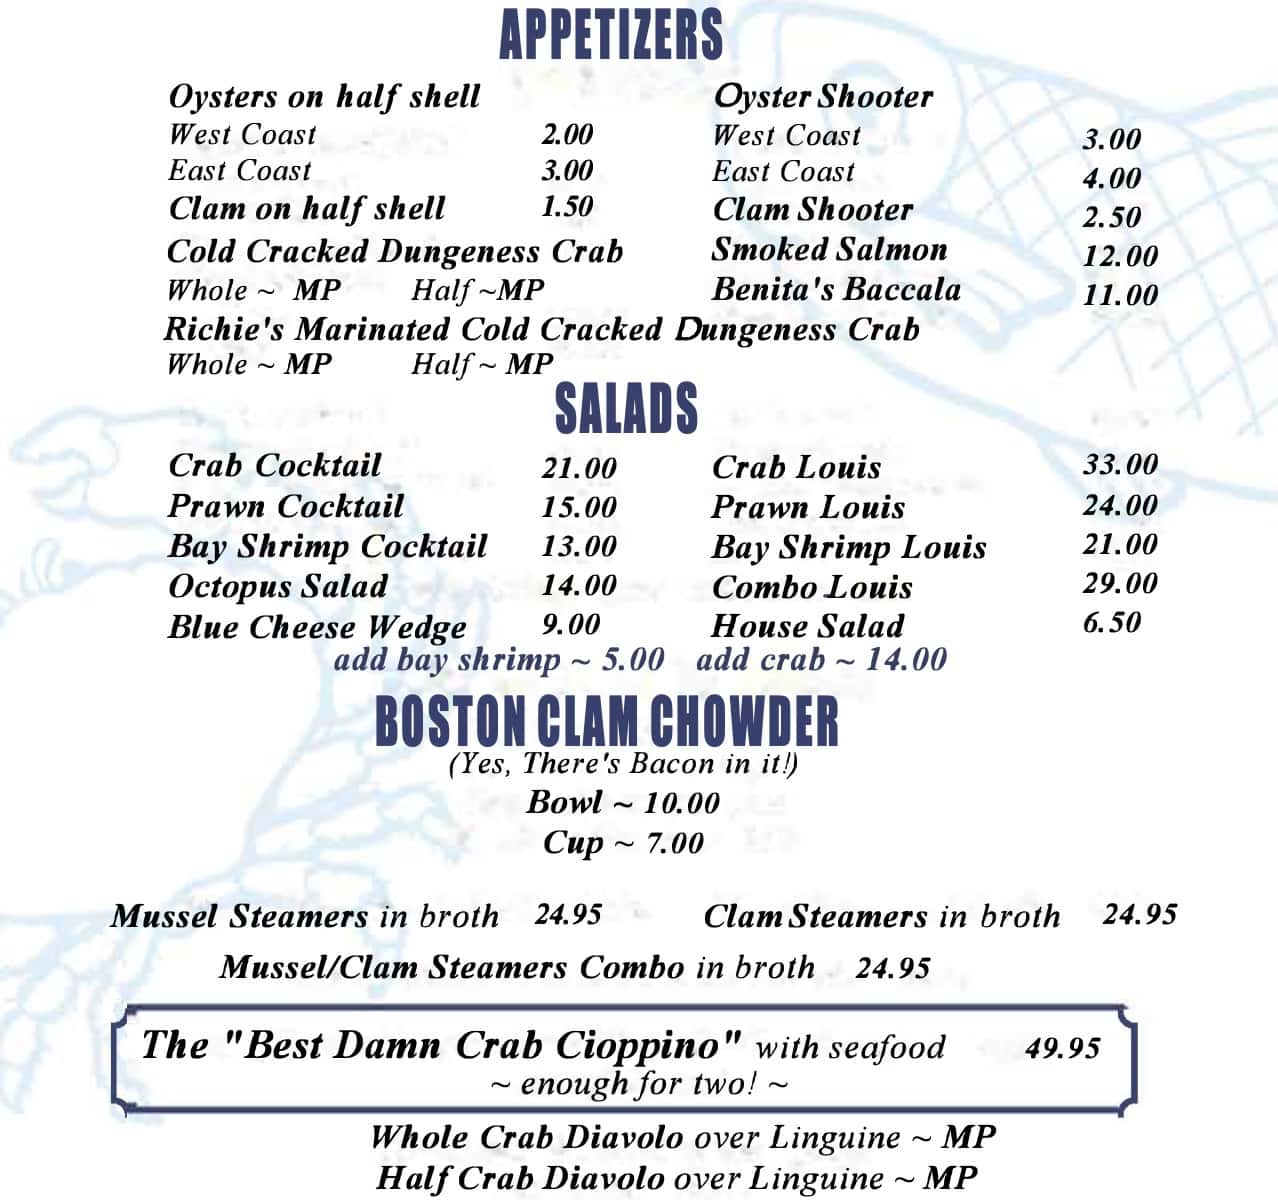 Sotto Mare Appetizers, Salads, and Boston Clam Chowder Menu